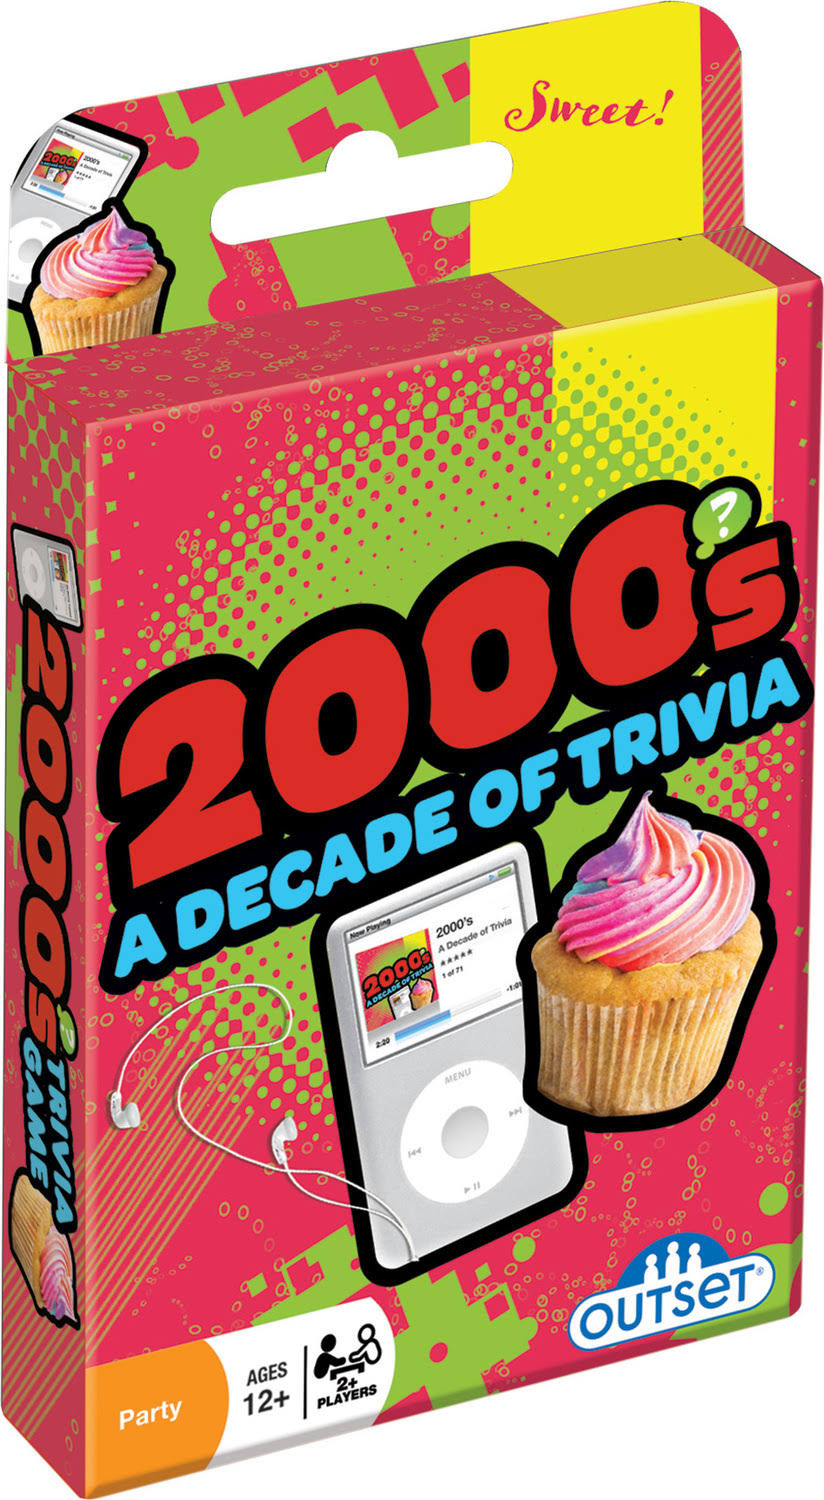 Outset Cards, 2000's A Decade of Trivia, Party, 2 + Players, Ages 12 +